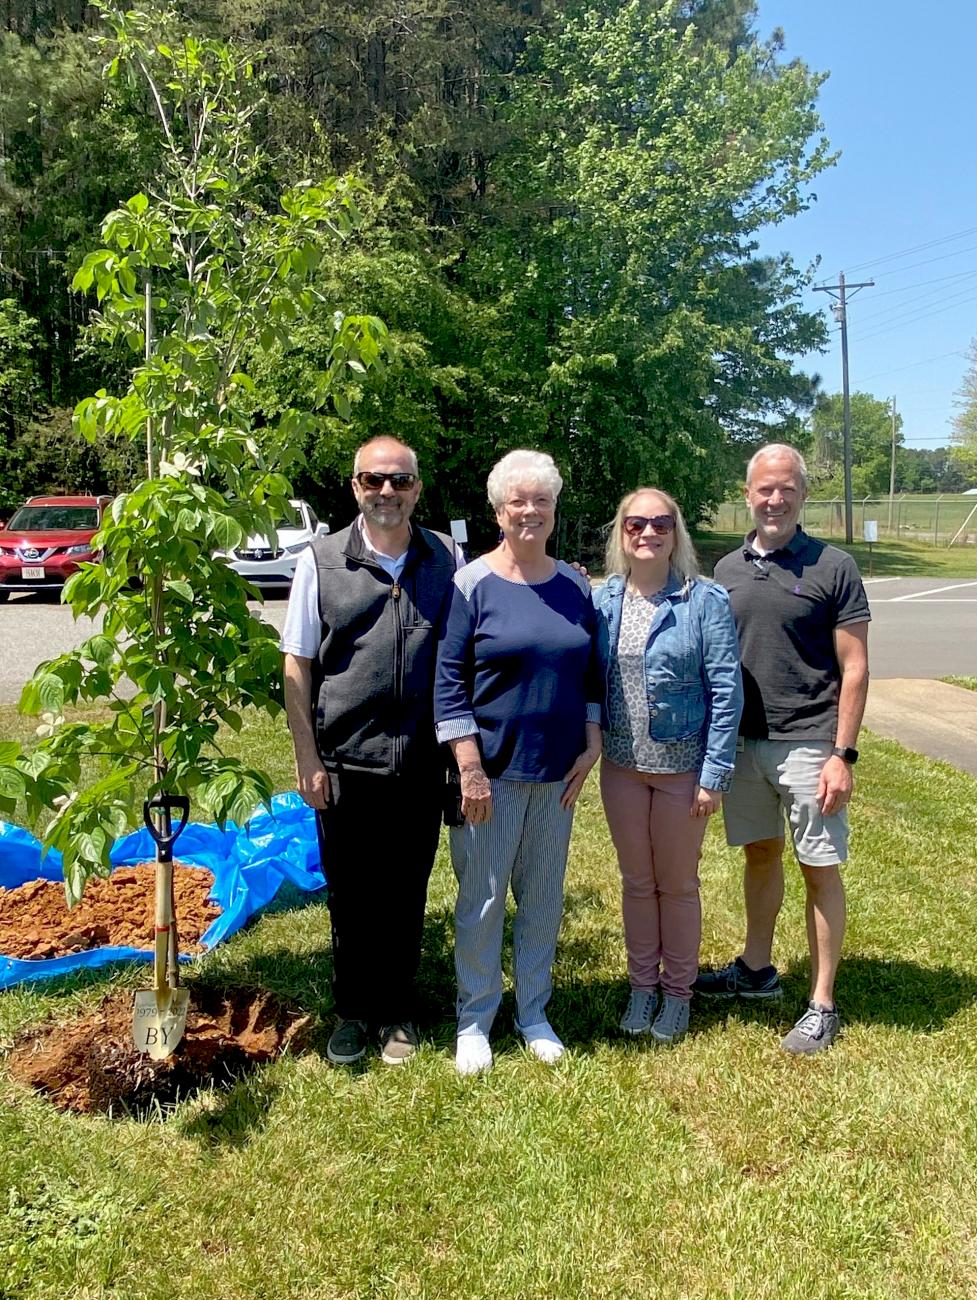 (from left to right): Conrad Kerley, vice president of leather & manufacturing operations; Jean Morgan, retiree; Cheryl Sigmon, vice president of merchandising & product development BY; and Craig Young, president of BY. Employees came together to plant a Dogwood tree in honor of Jean Morgan, who retired at the end of April after 43 years with the company.